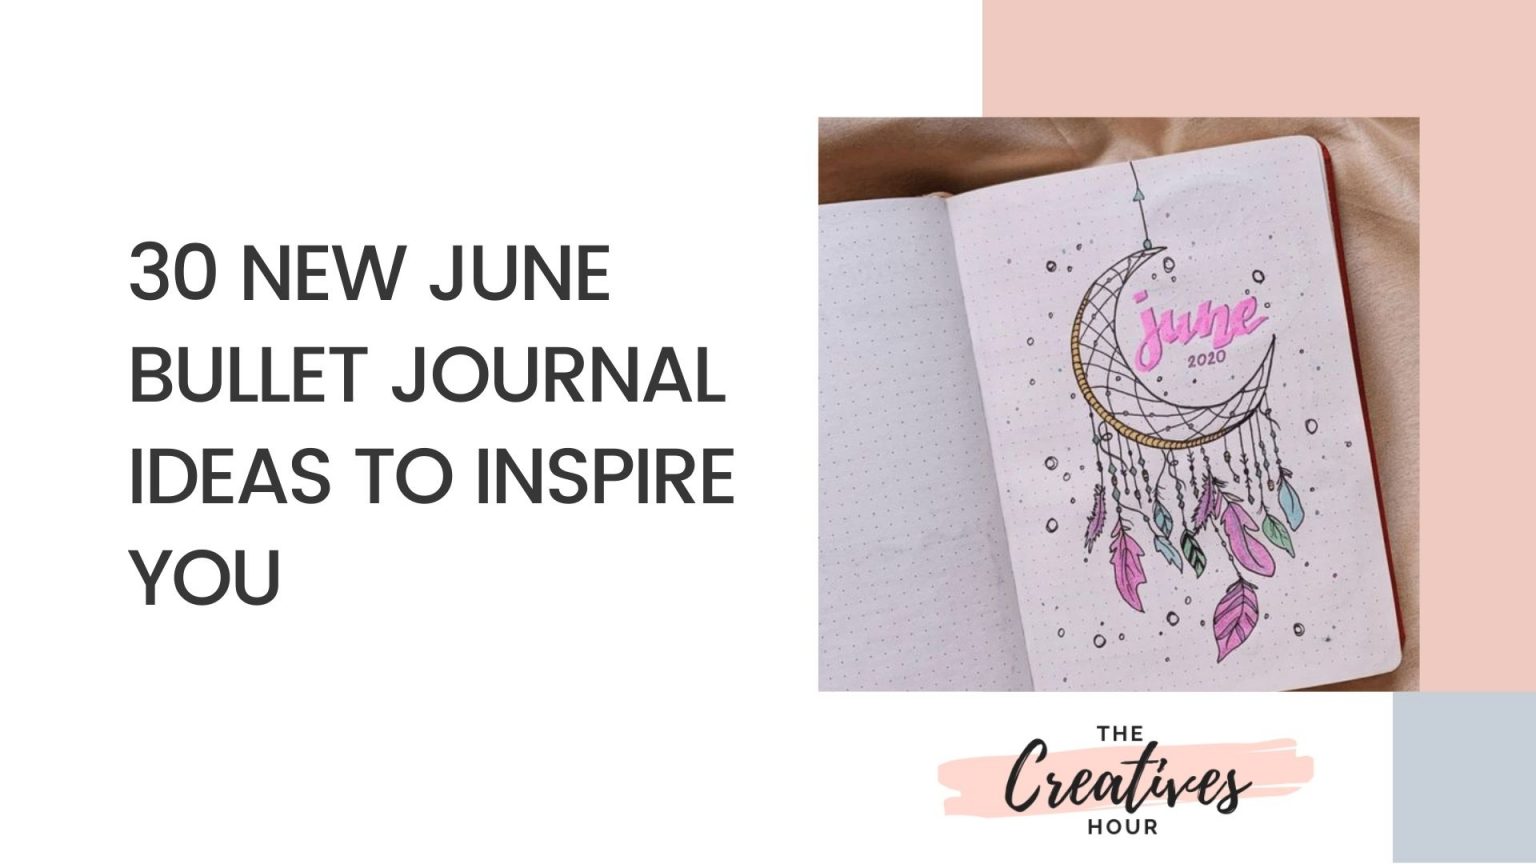 30 New June Bullet Journal Ideas To Inspire You